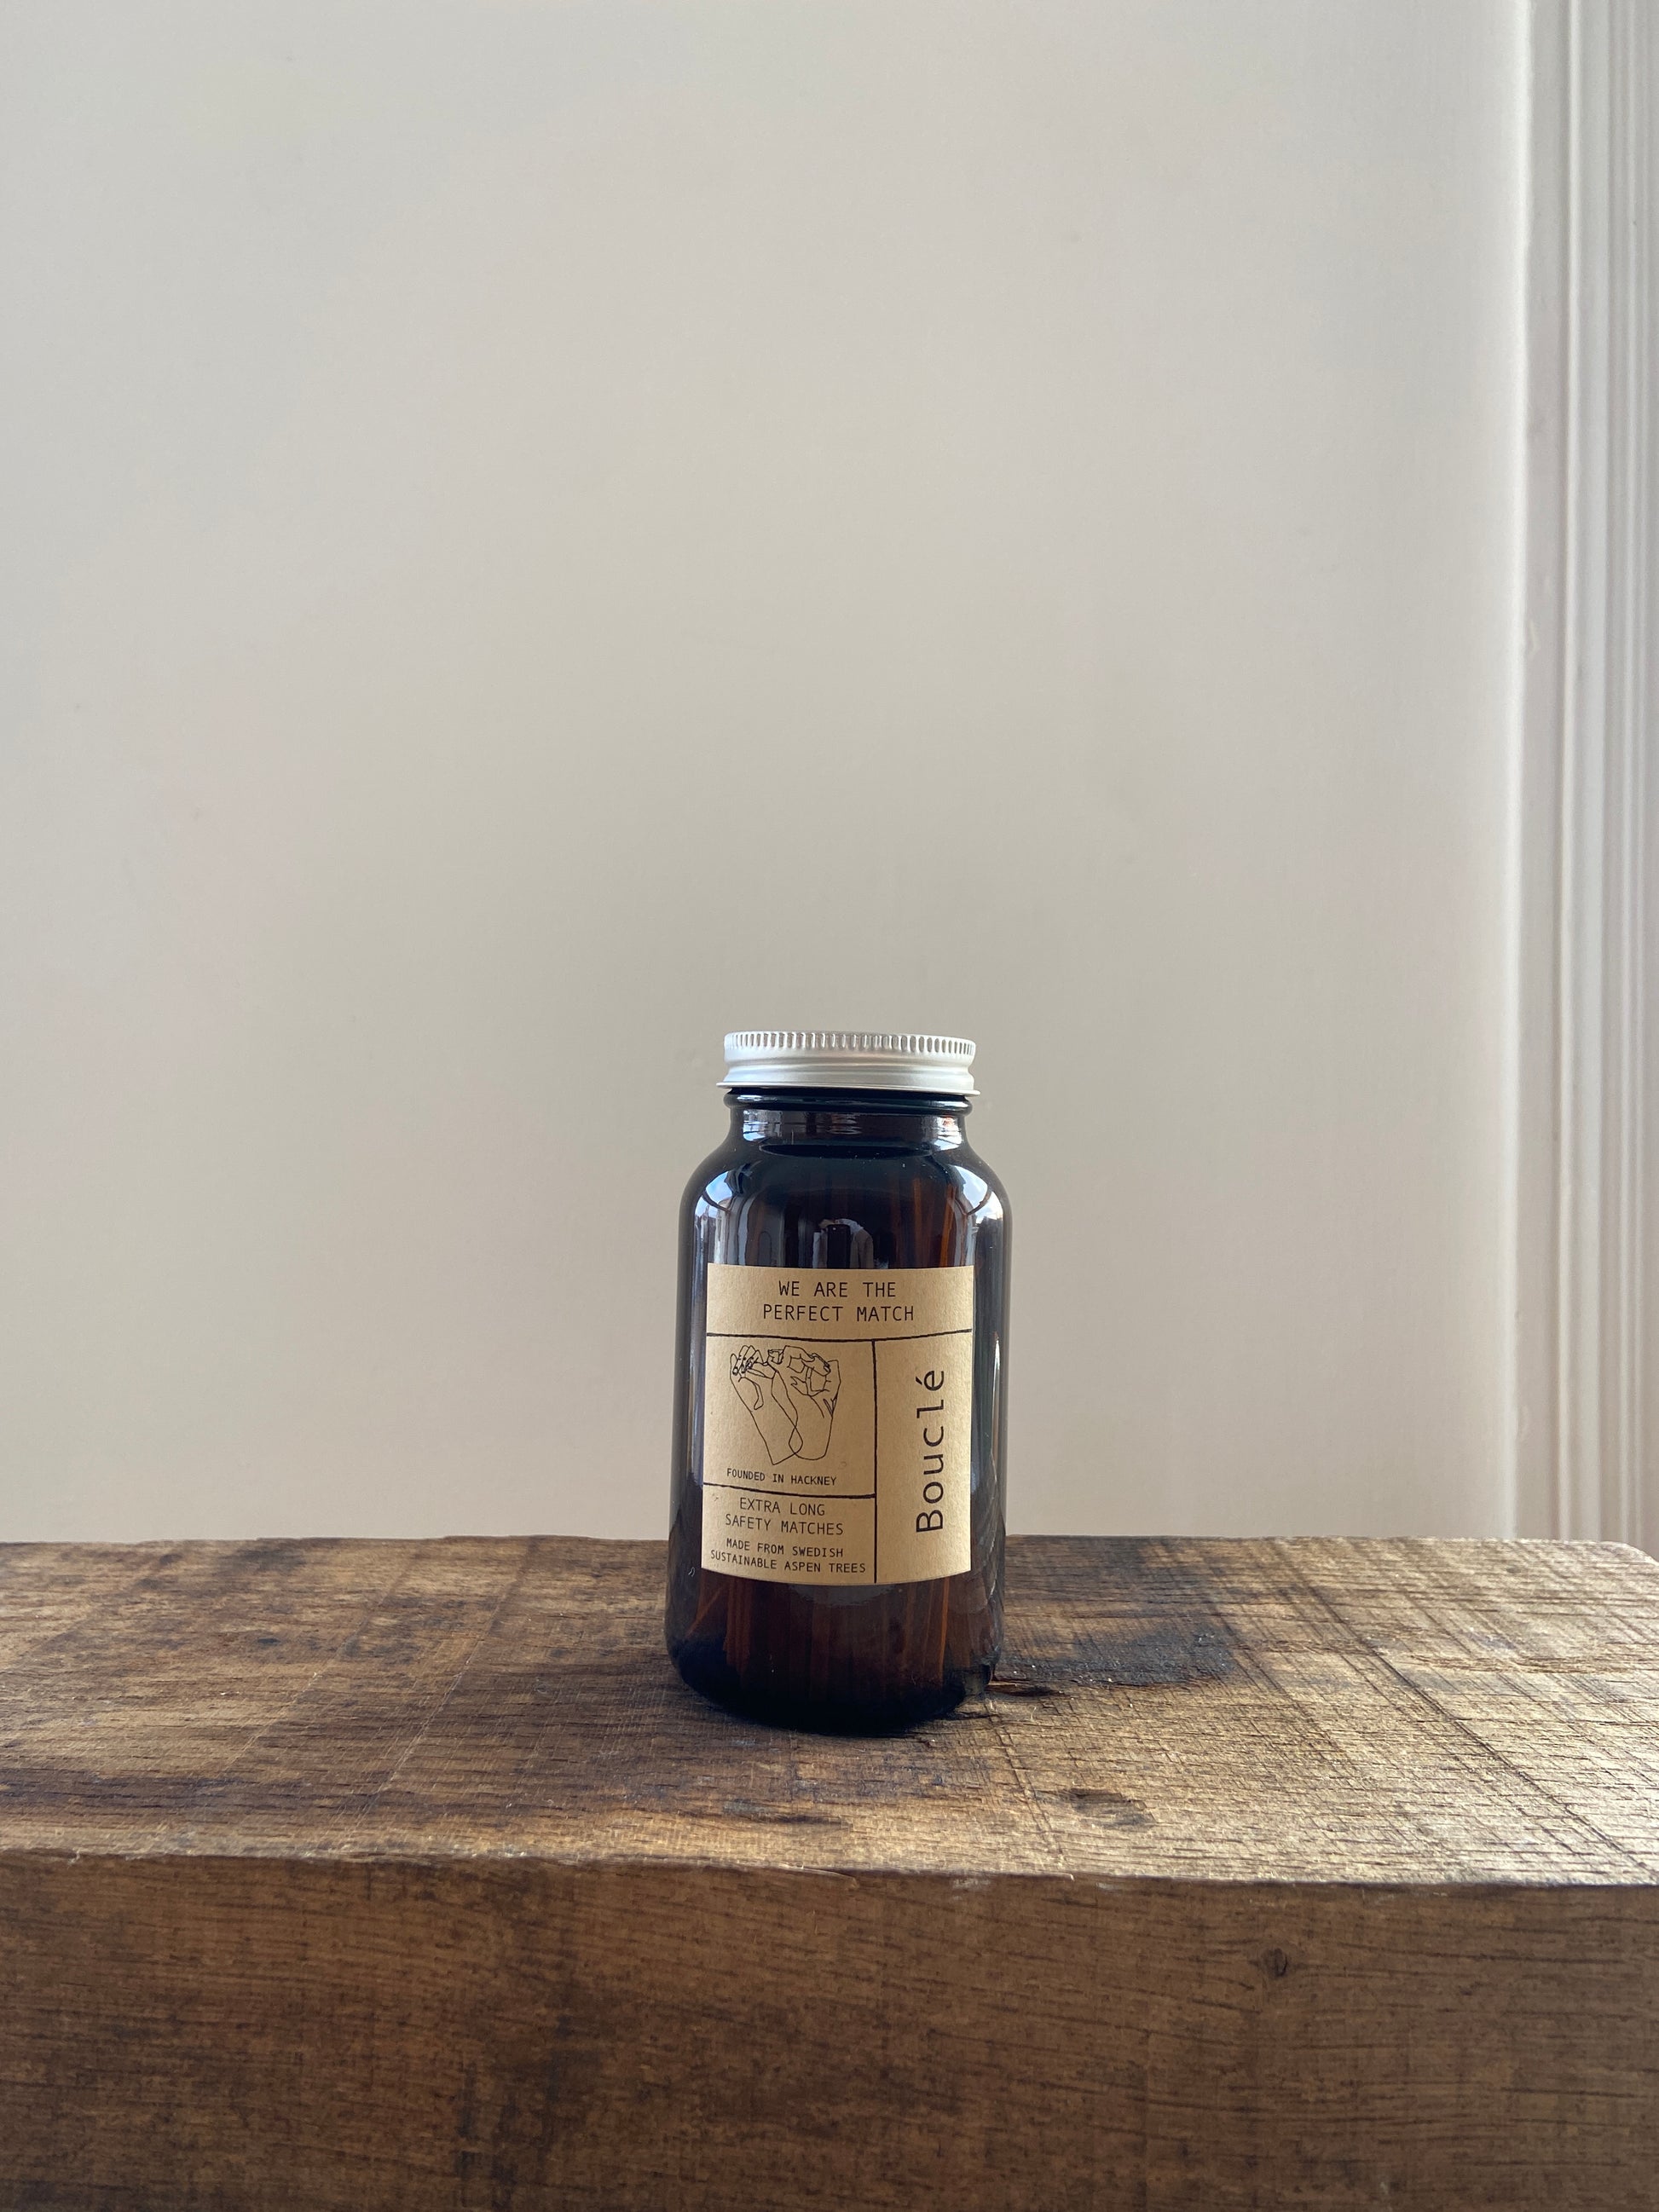 Sustainably sourced extra long matches in amber glass apothecary style jar founded in Hackney.